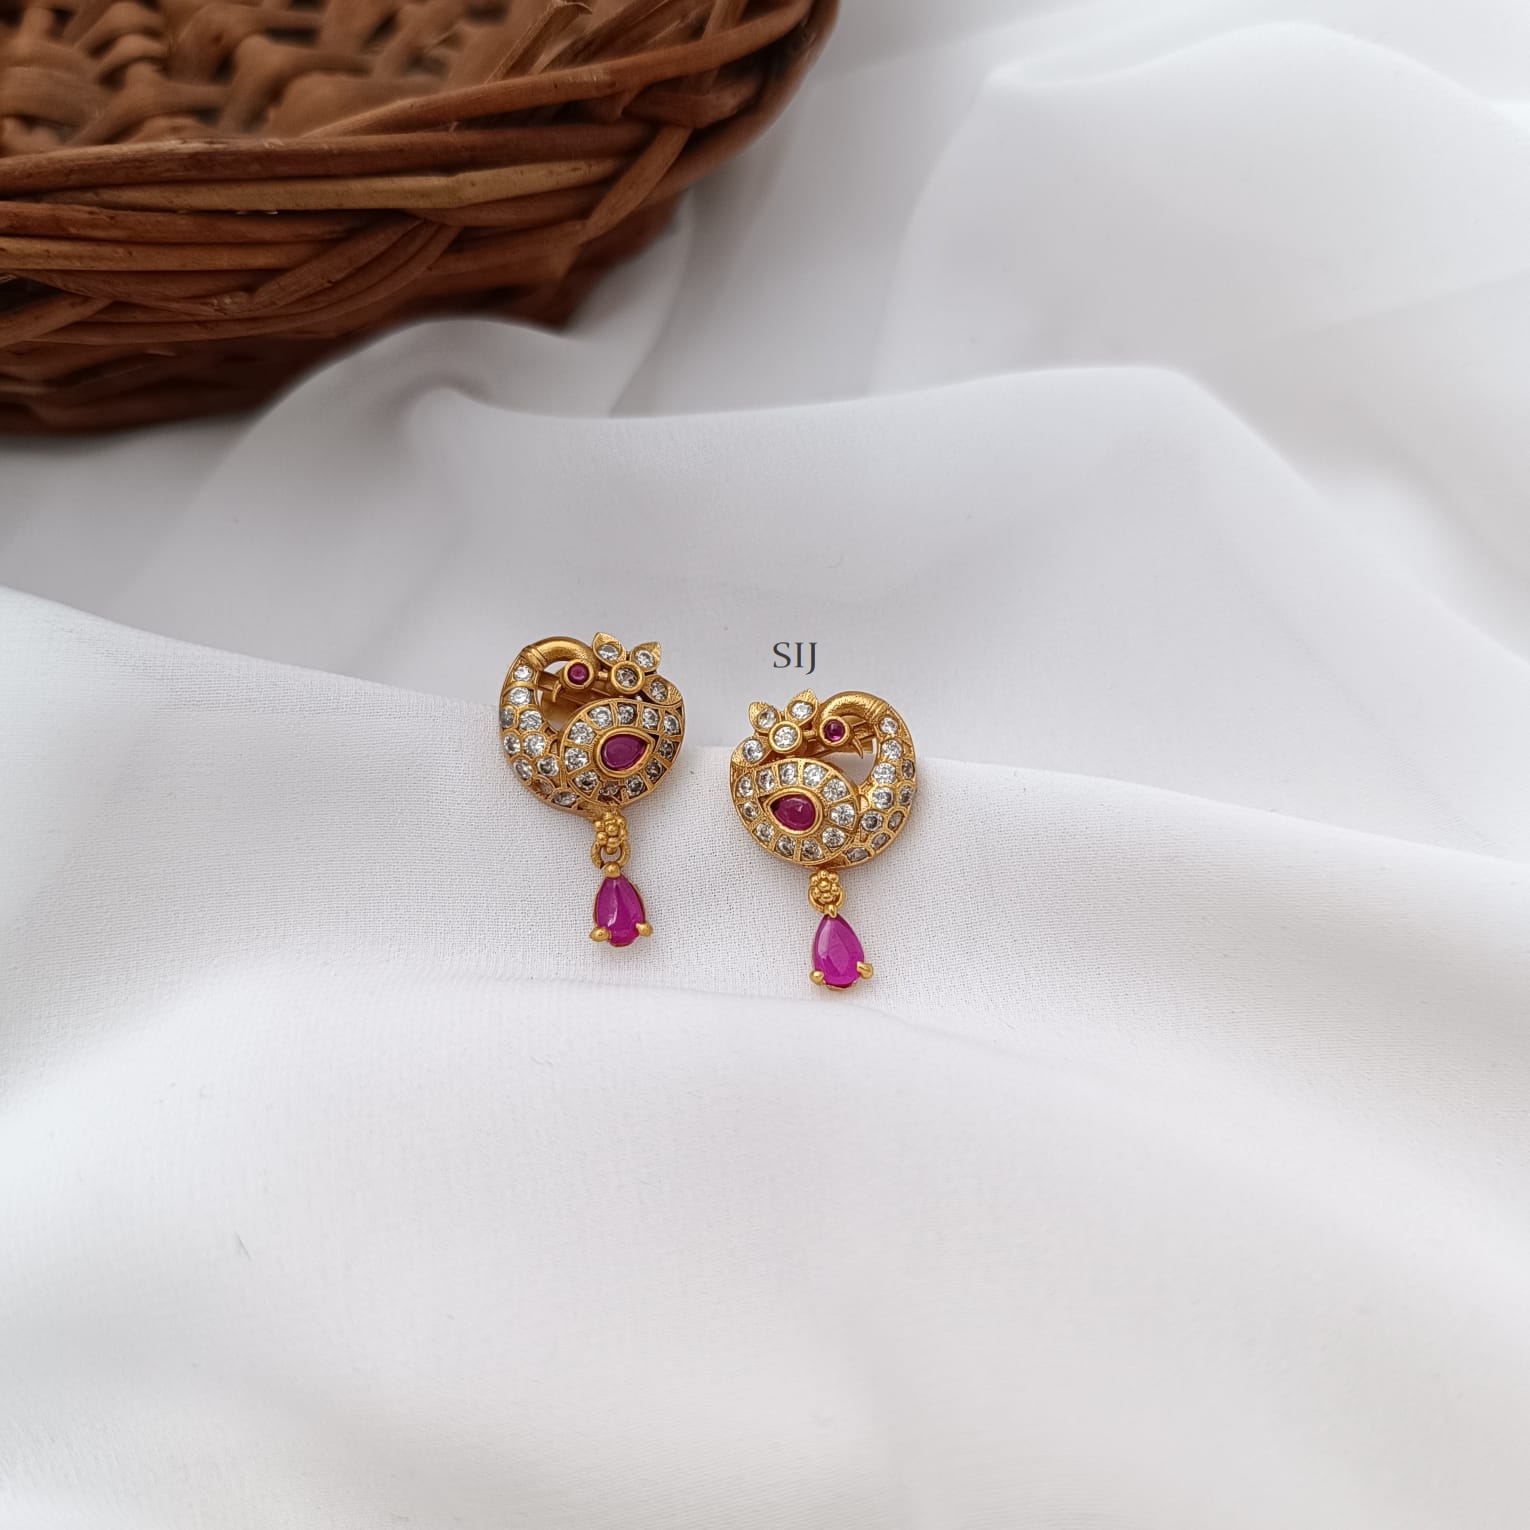 Fabulous Pink and White Stones Peacock Earrings